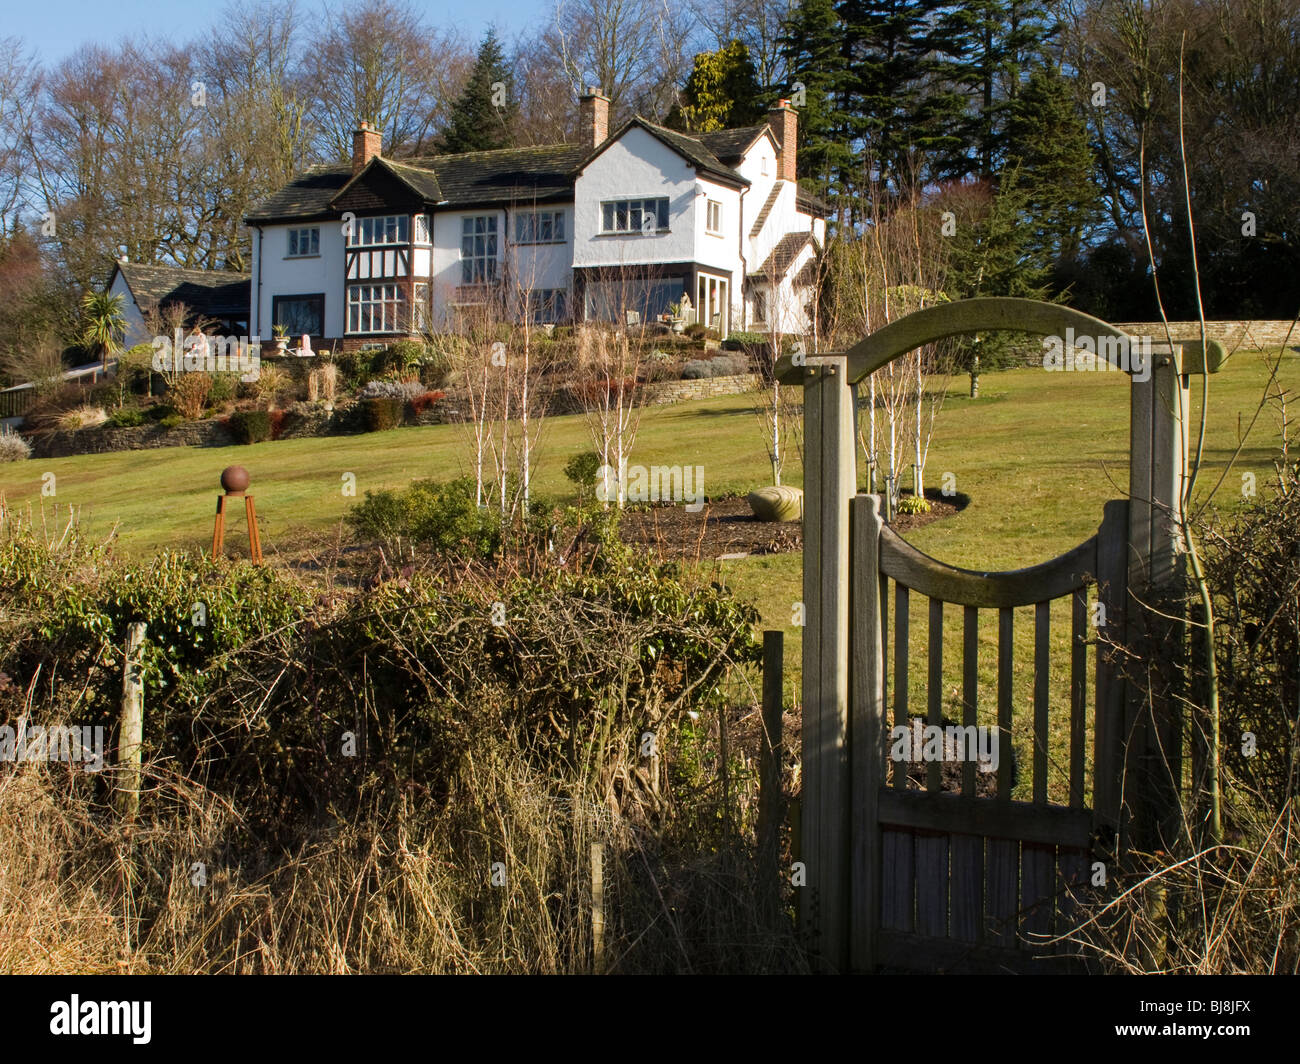 Cheshire, Mottram St Andrew, beautiful detached house with garden sloping to wooden gate Stock Photo